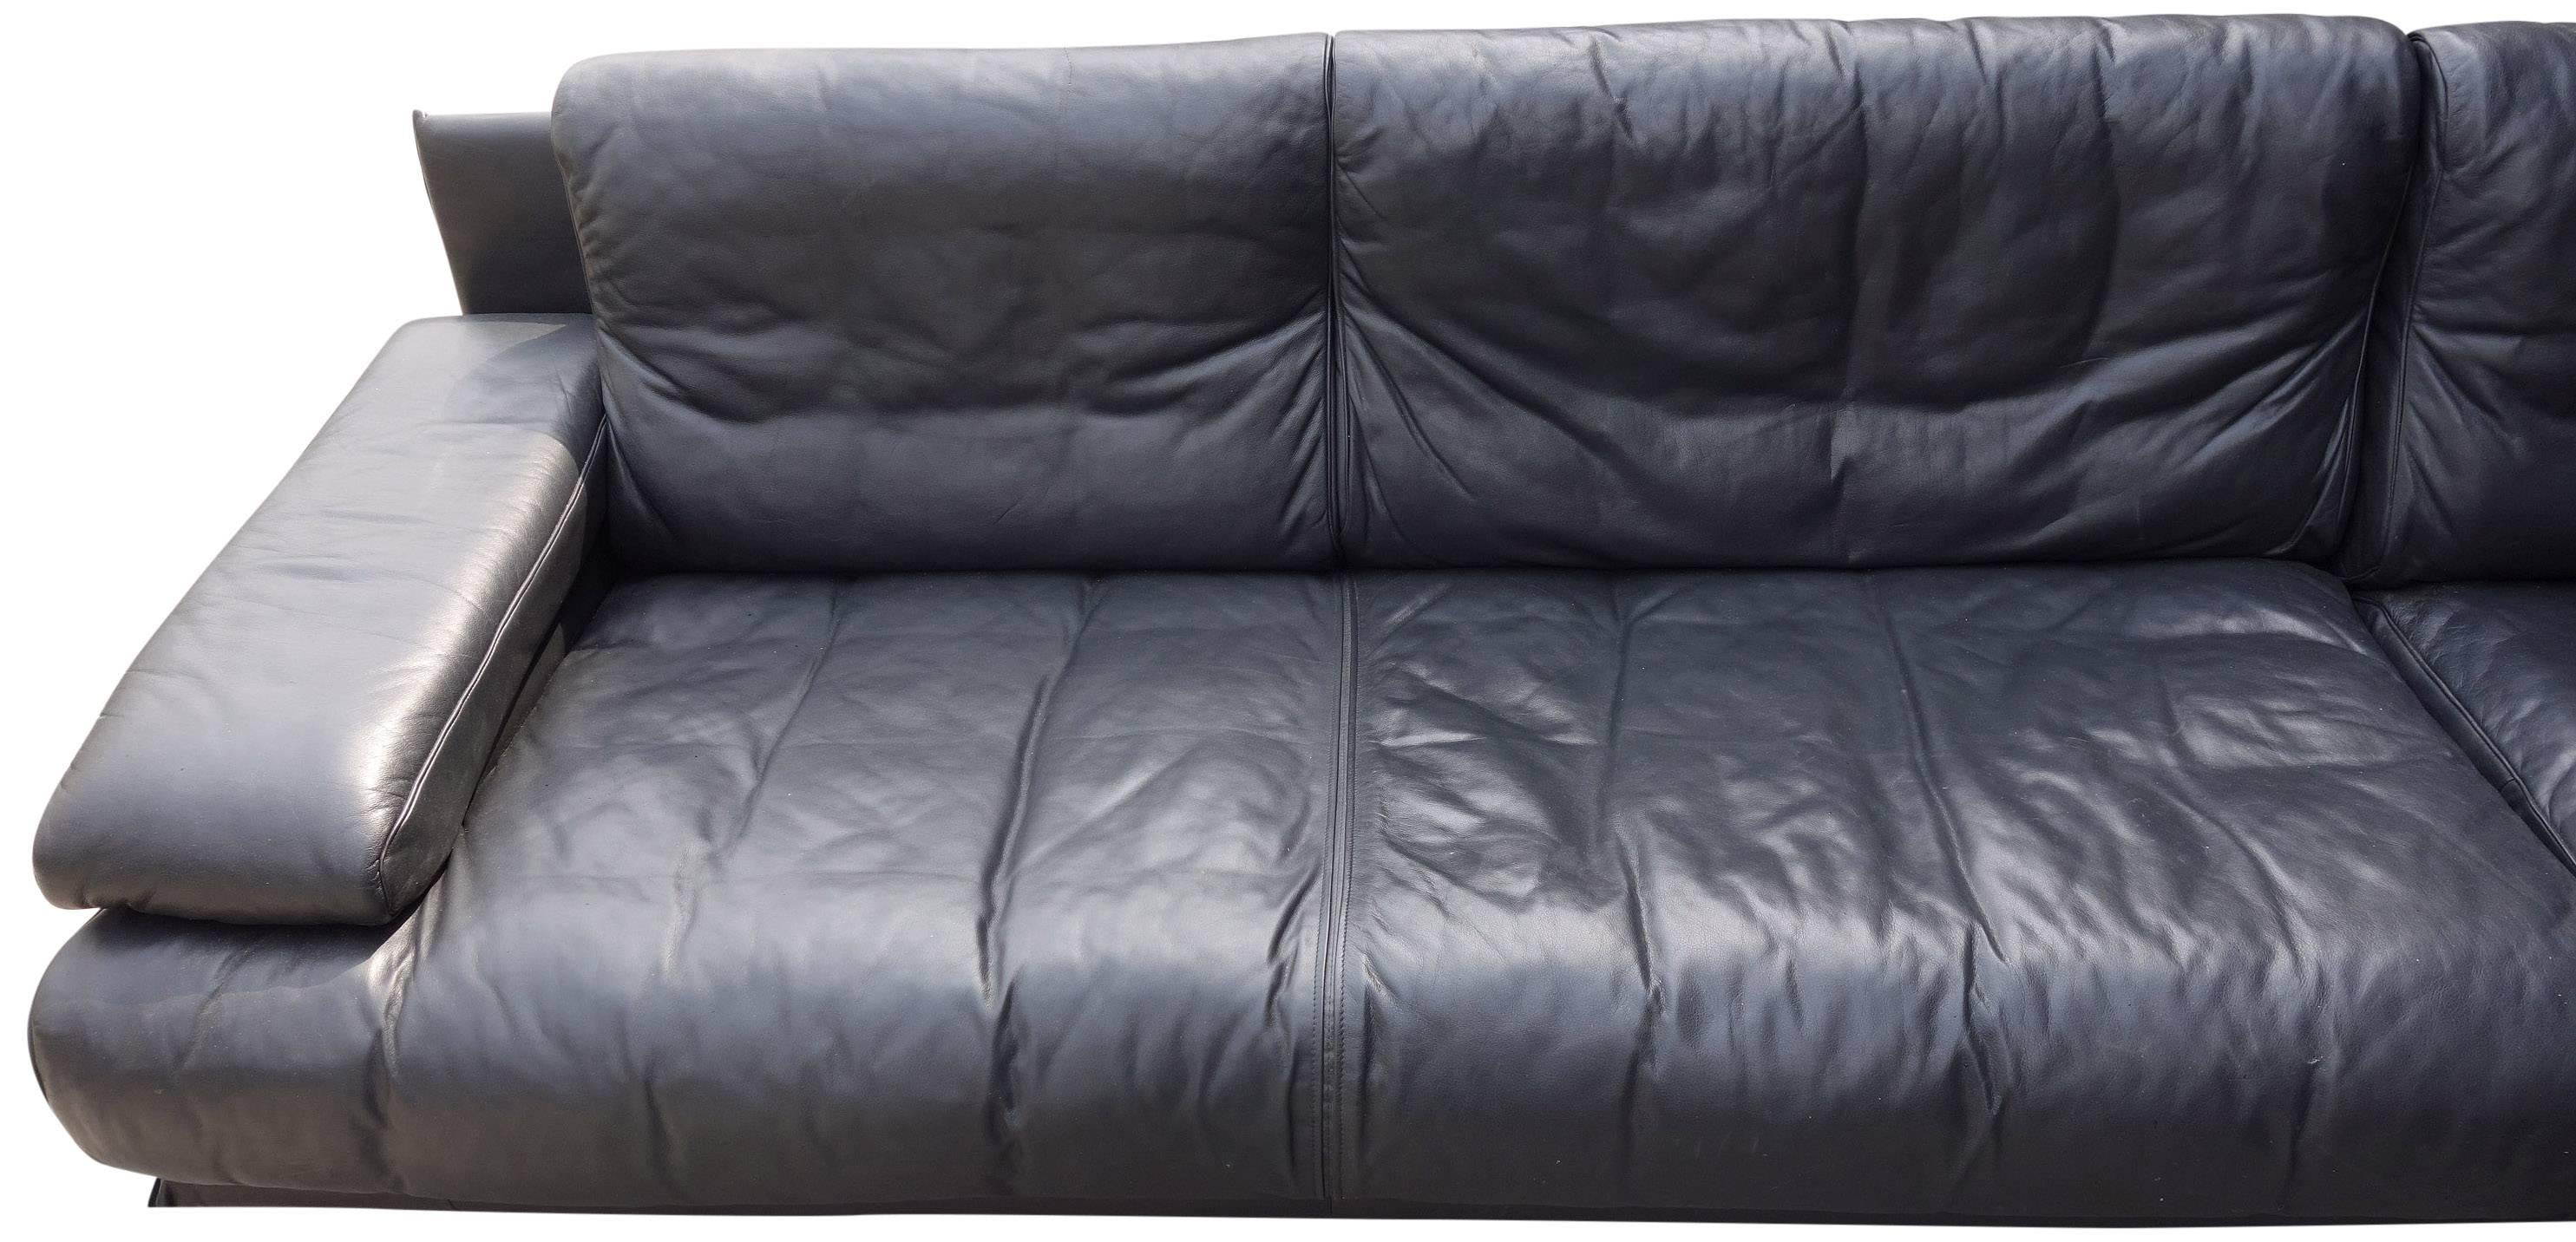 This midcentury black leather sectional on a floating chrome tubular base is a custom design produced by Cy Mann in New York. Very thick yet supple black leather. Subtle patterns from the seams resonate De Sede. Included are tubular shaped leather